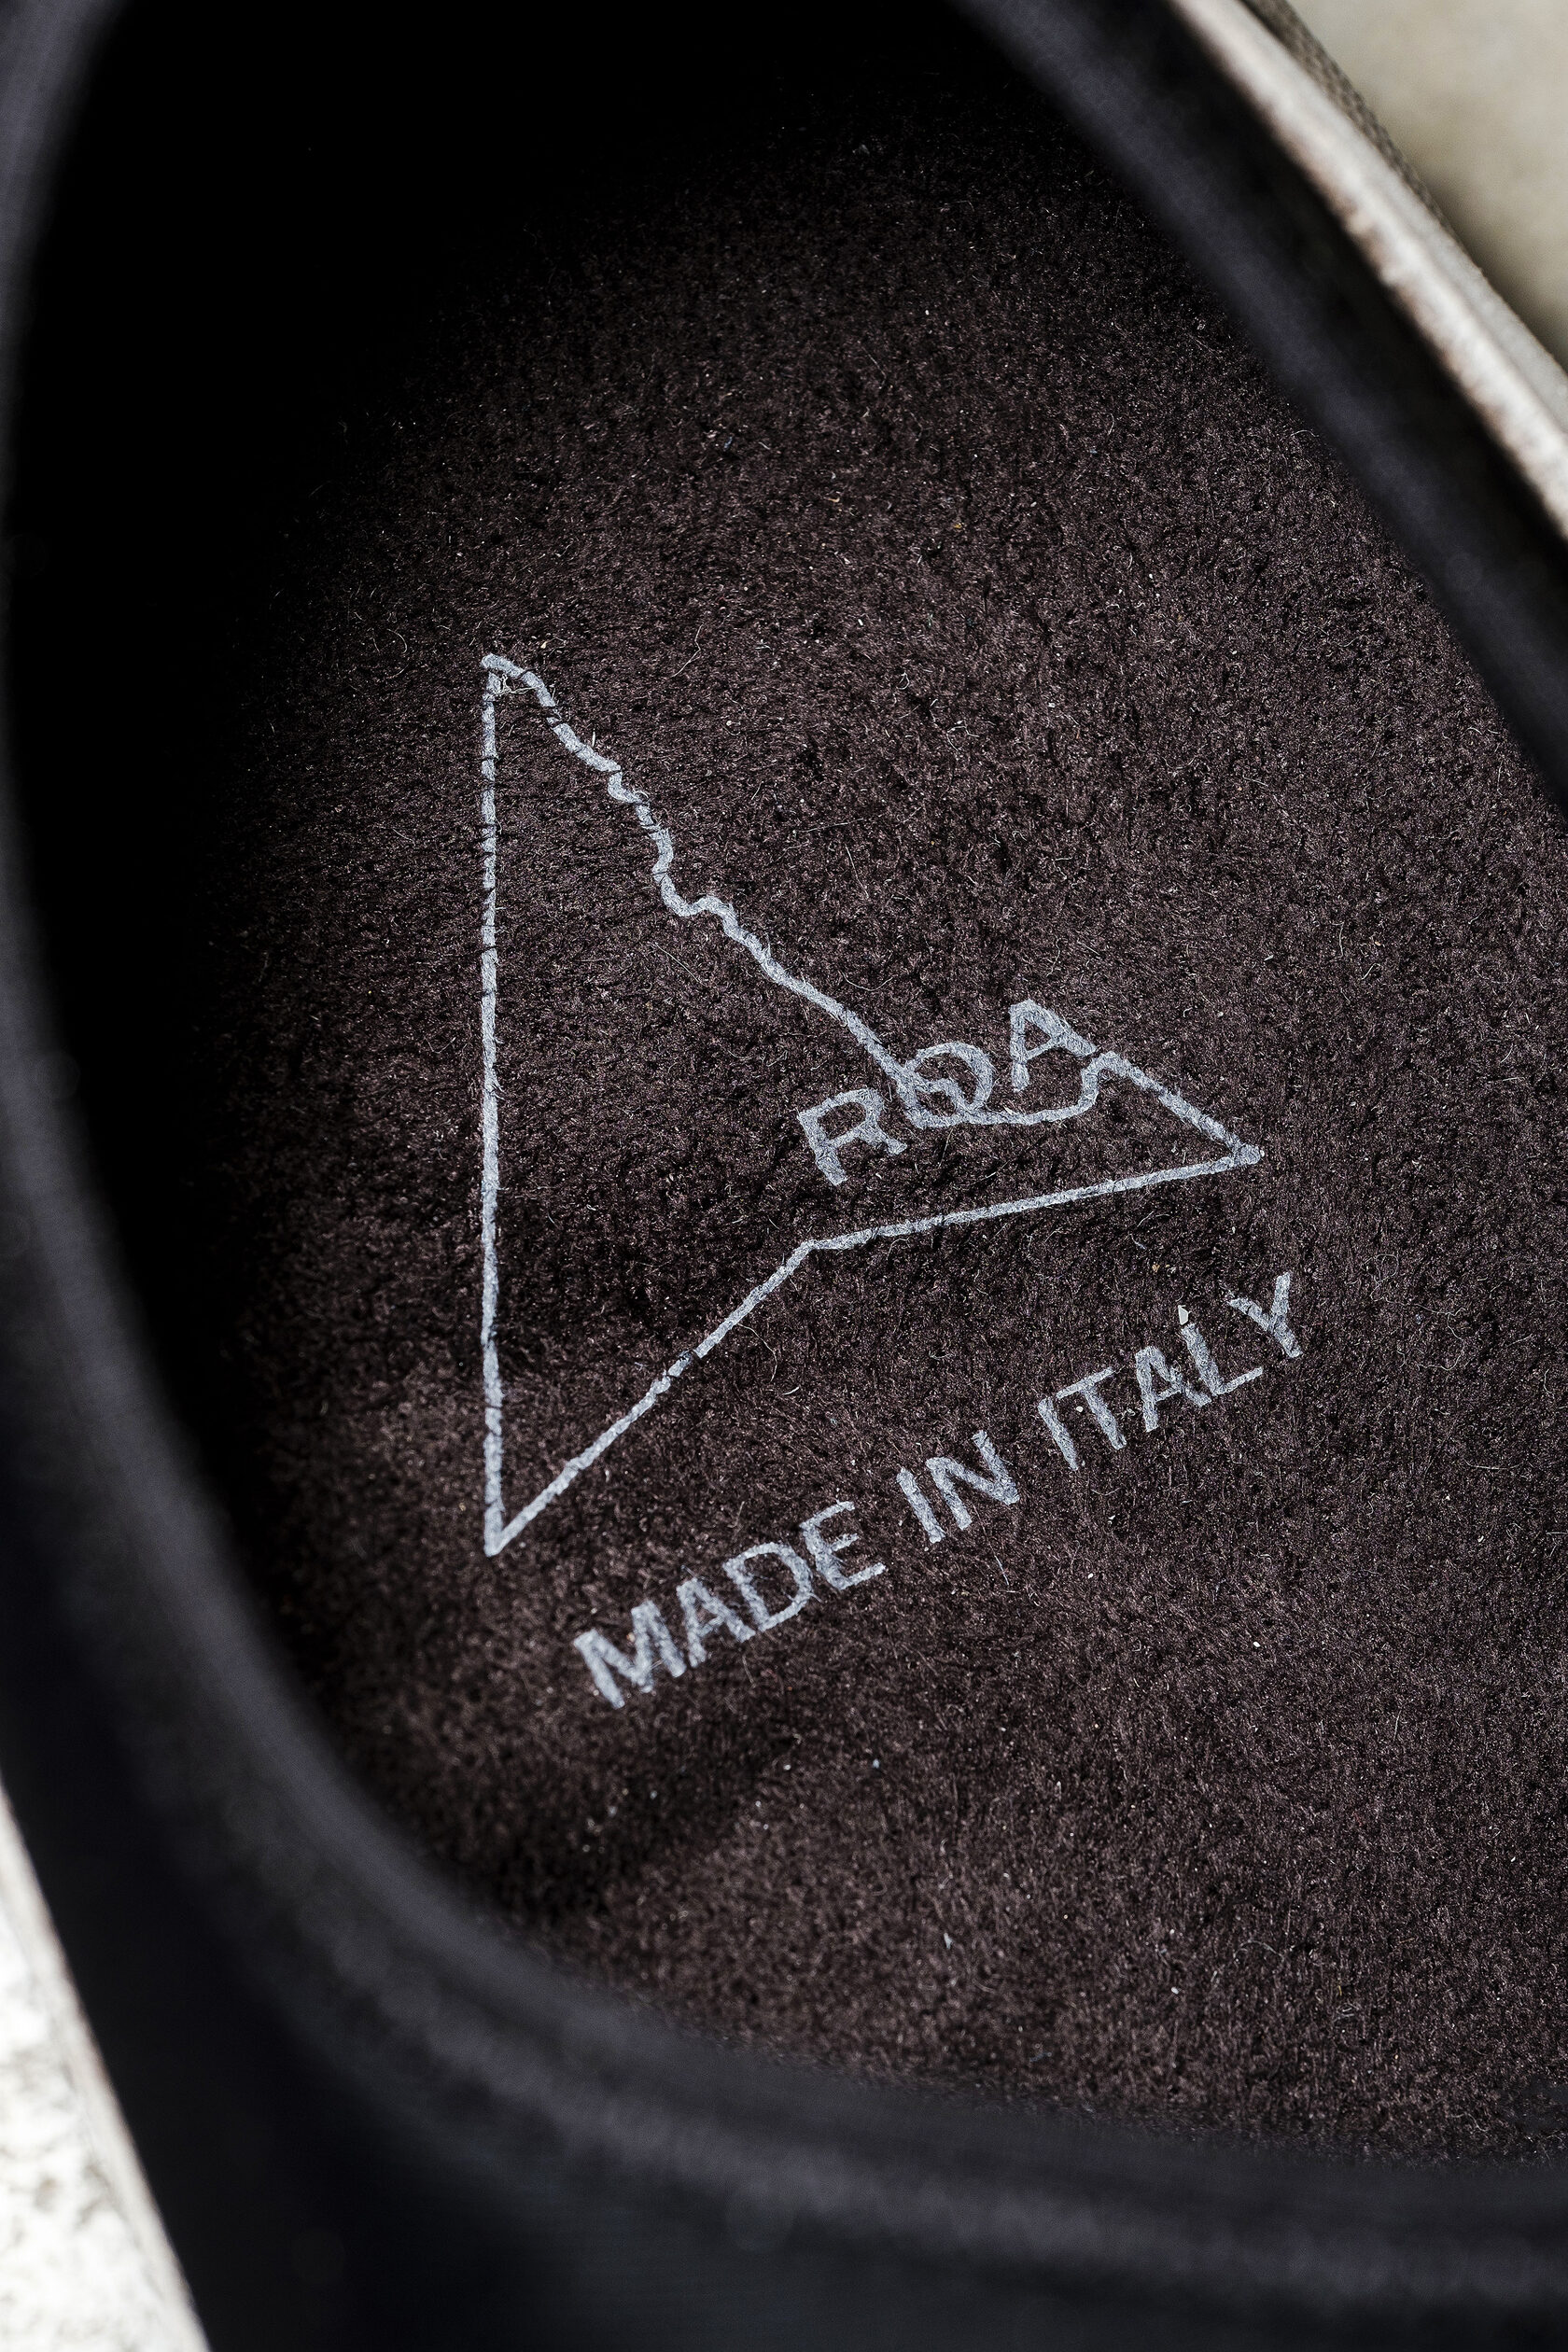 ROA Hiking FW22 footwear and apparel [Review]